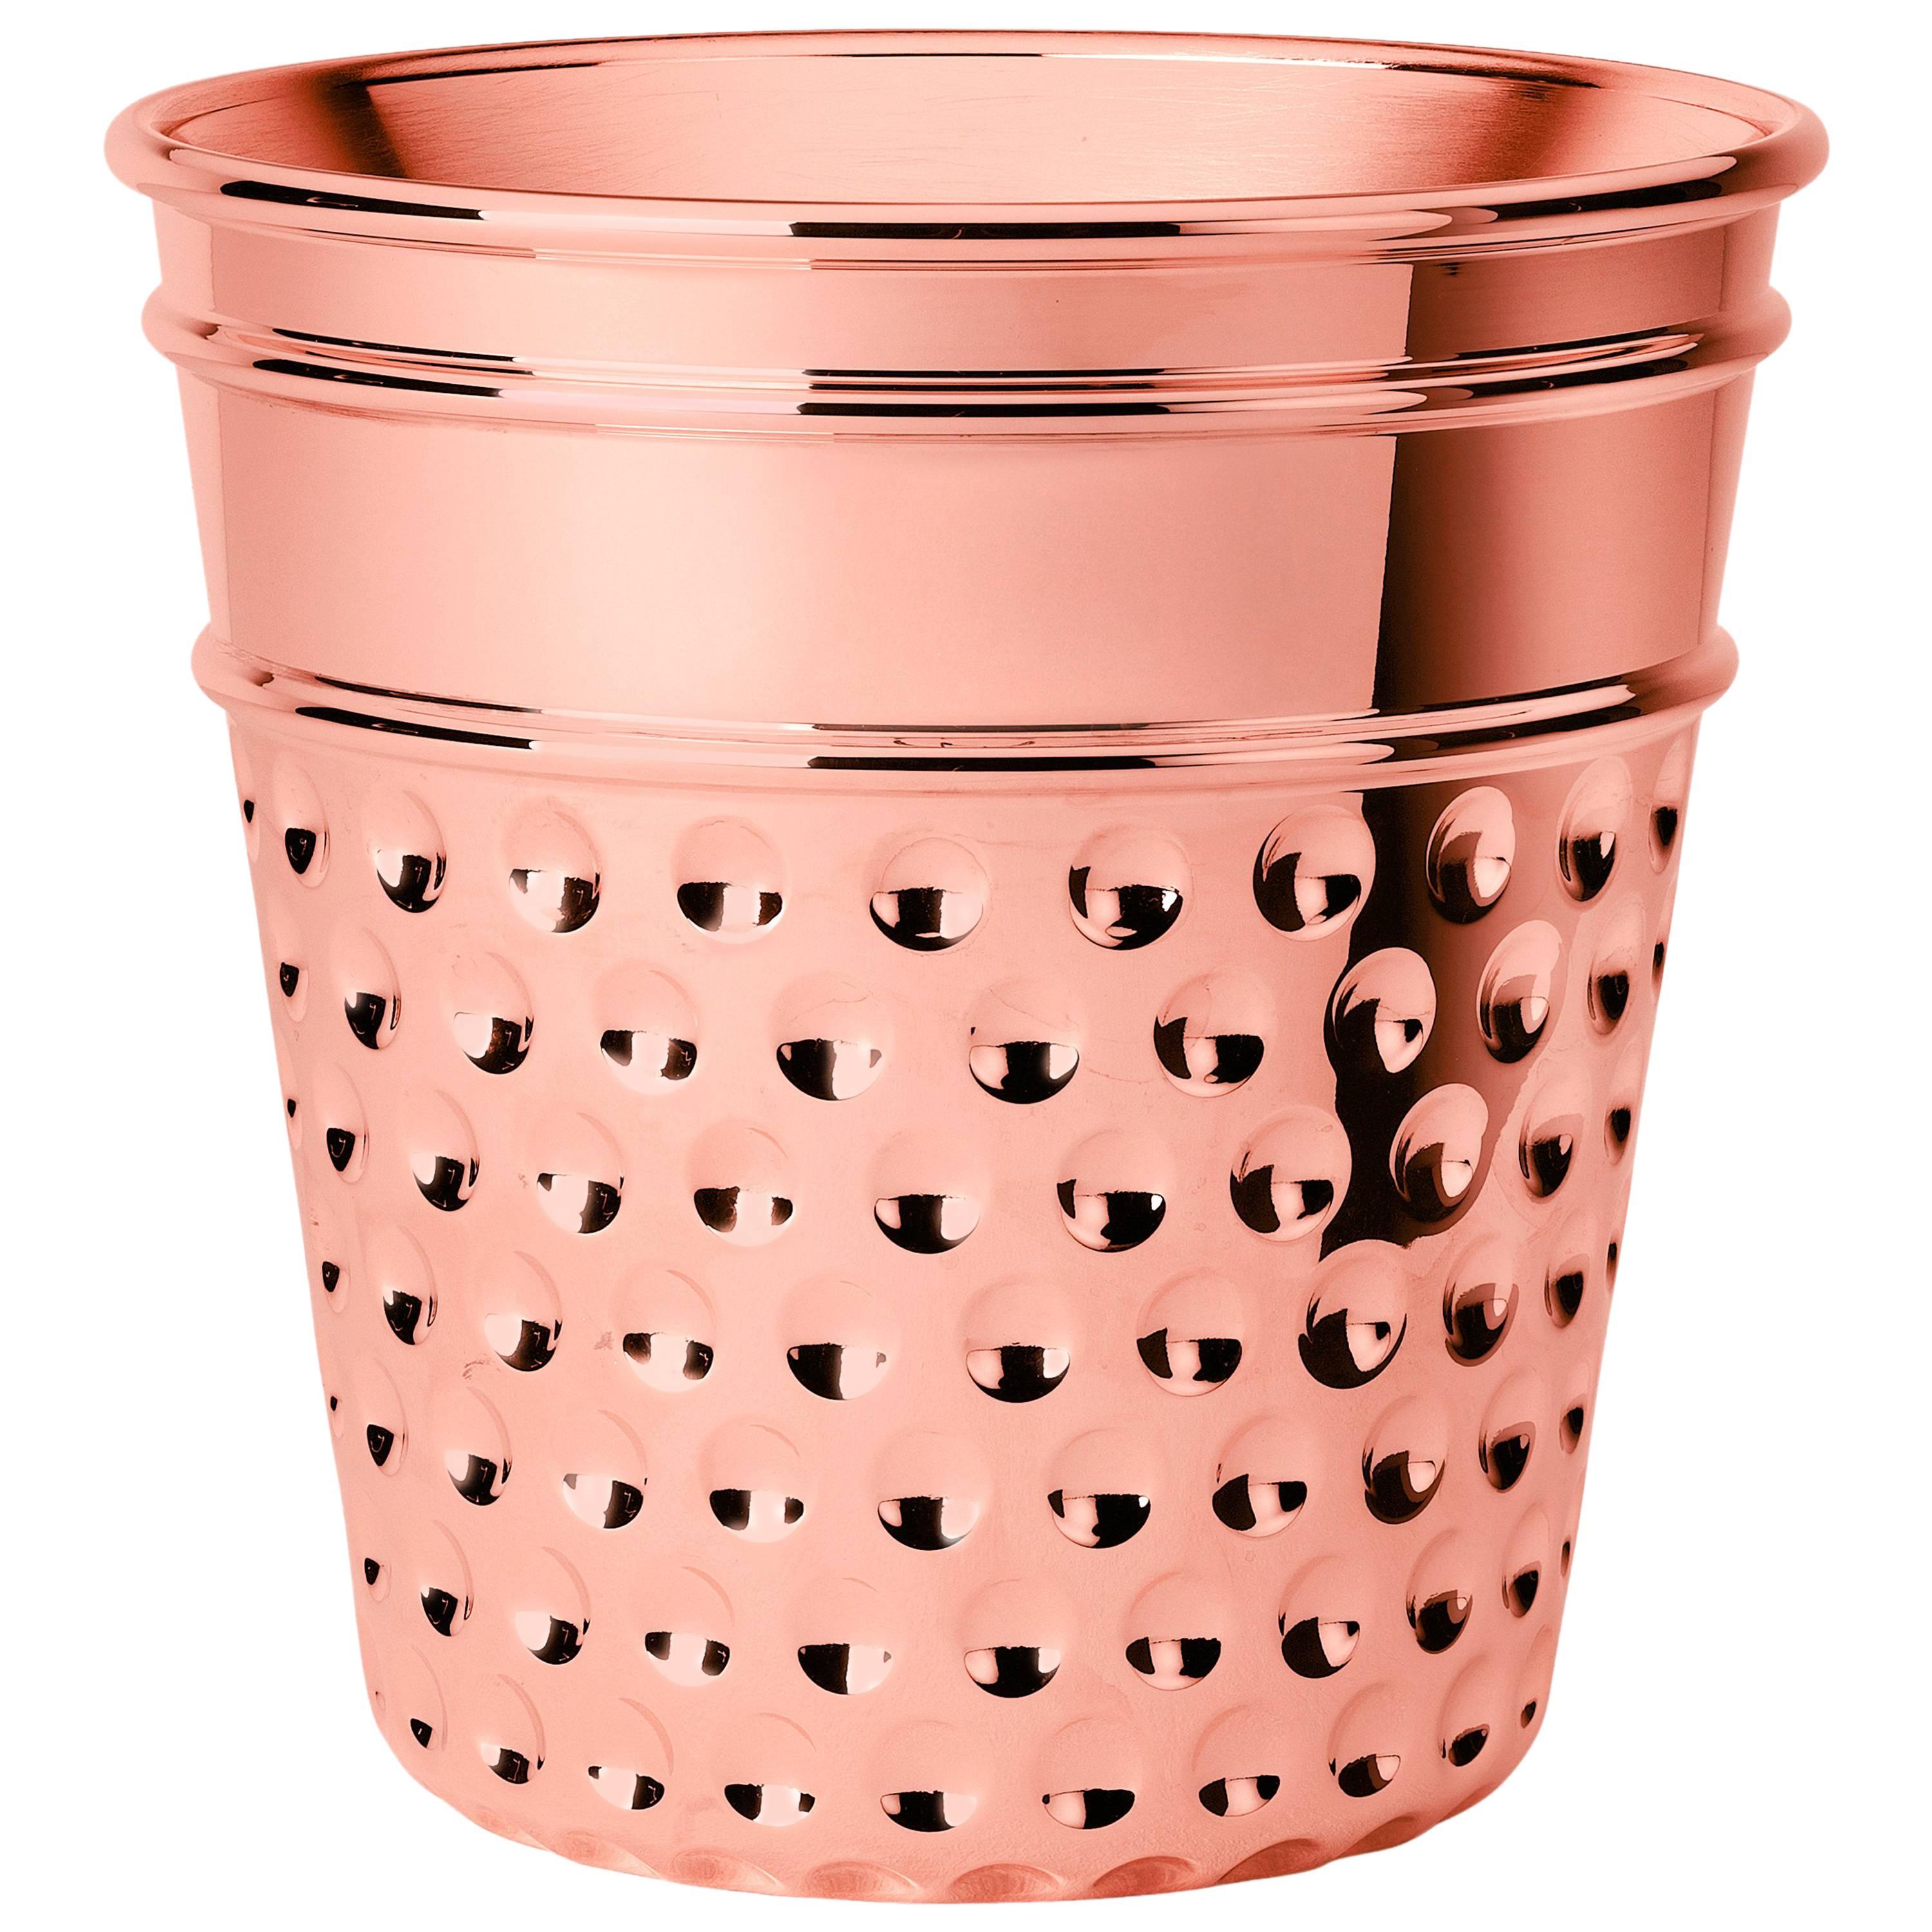 Ghidini 1961 Here "Thimble" Ice Bucket in Rose Gold Finish For Sale